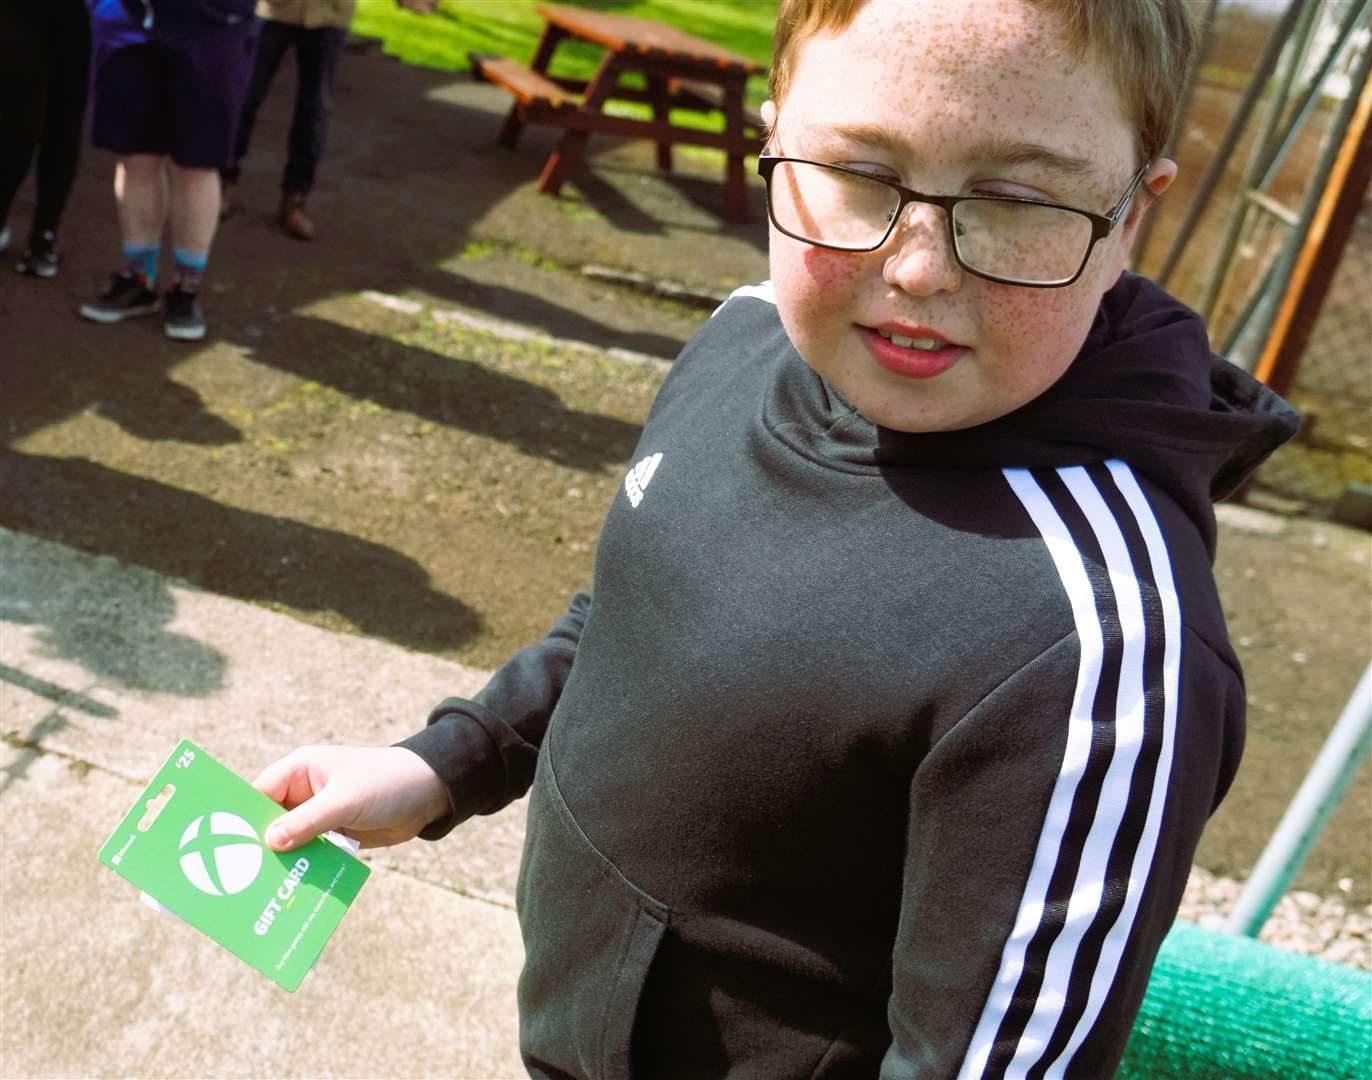 Jamie was delighted to receive an Xbox game card. Picture: DGS